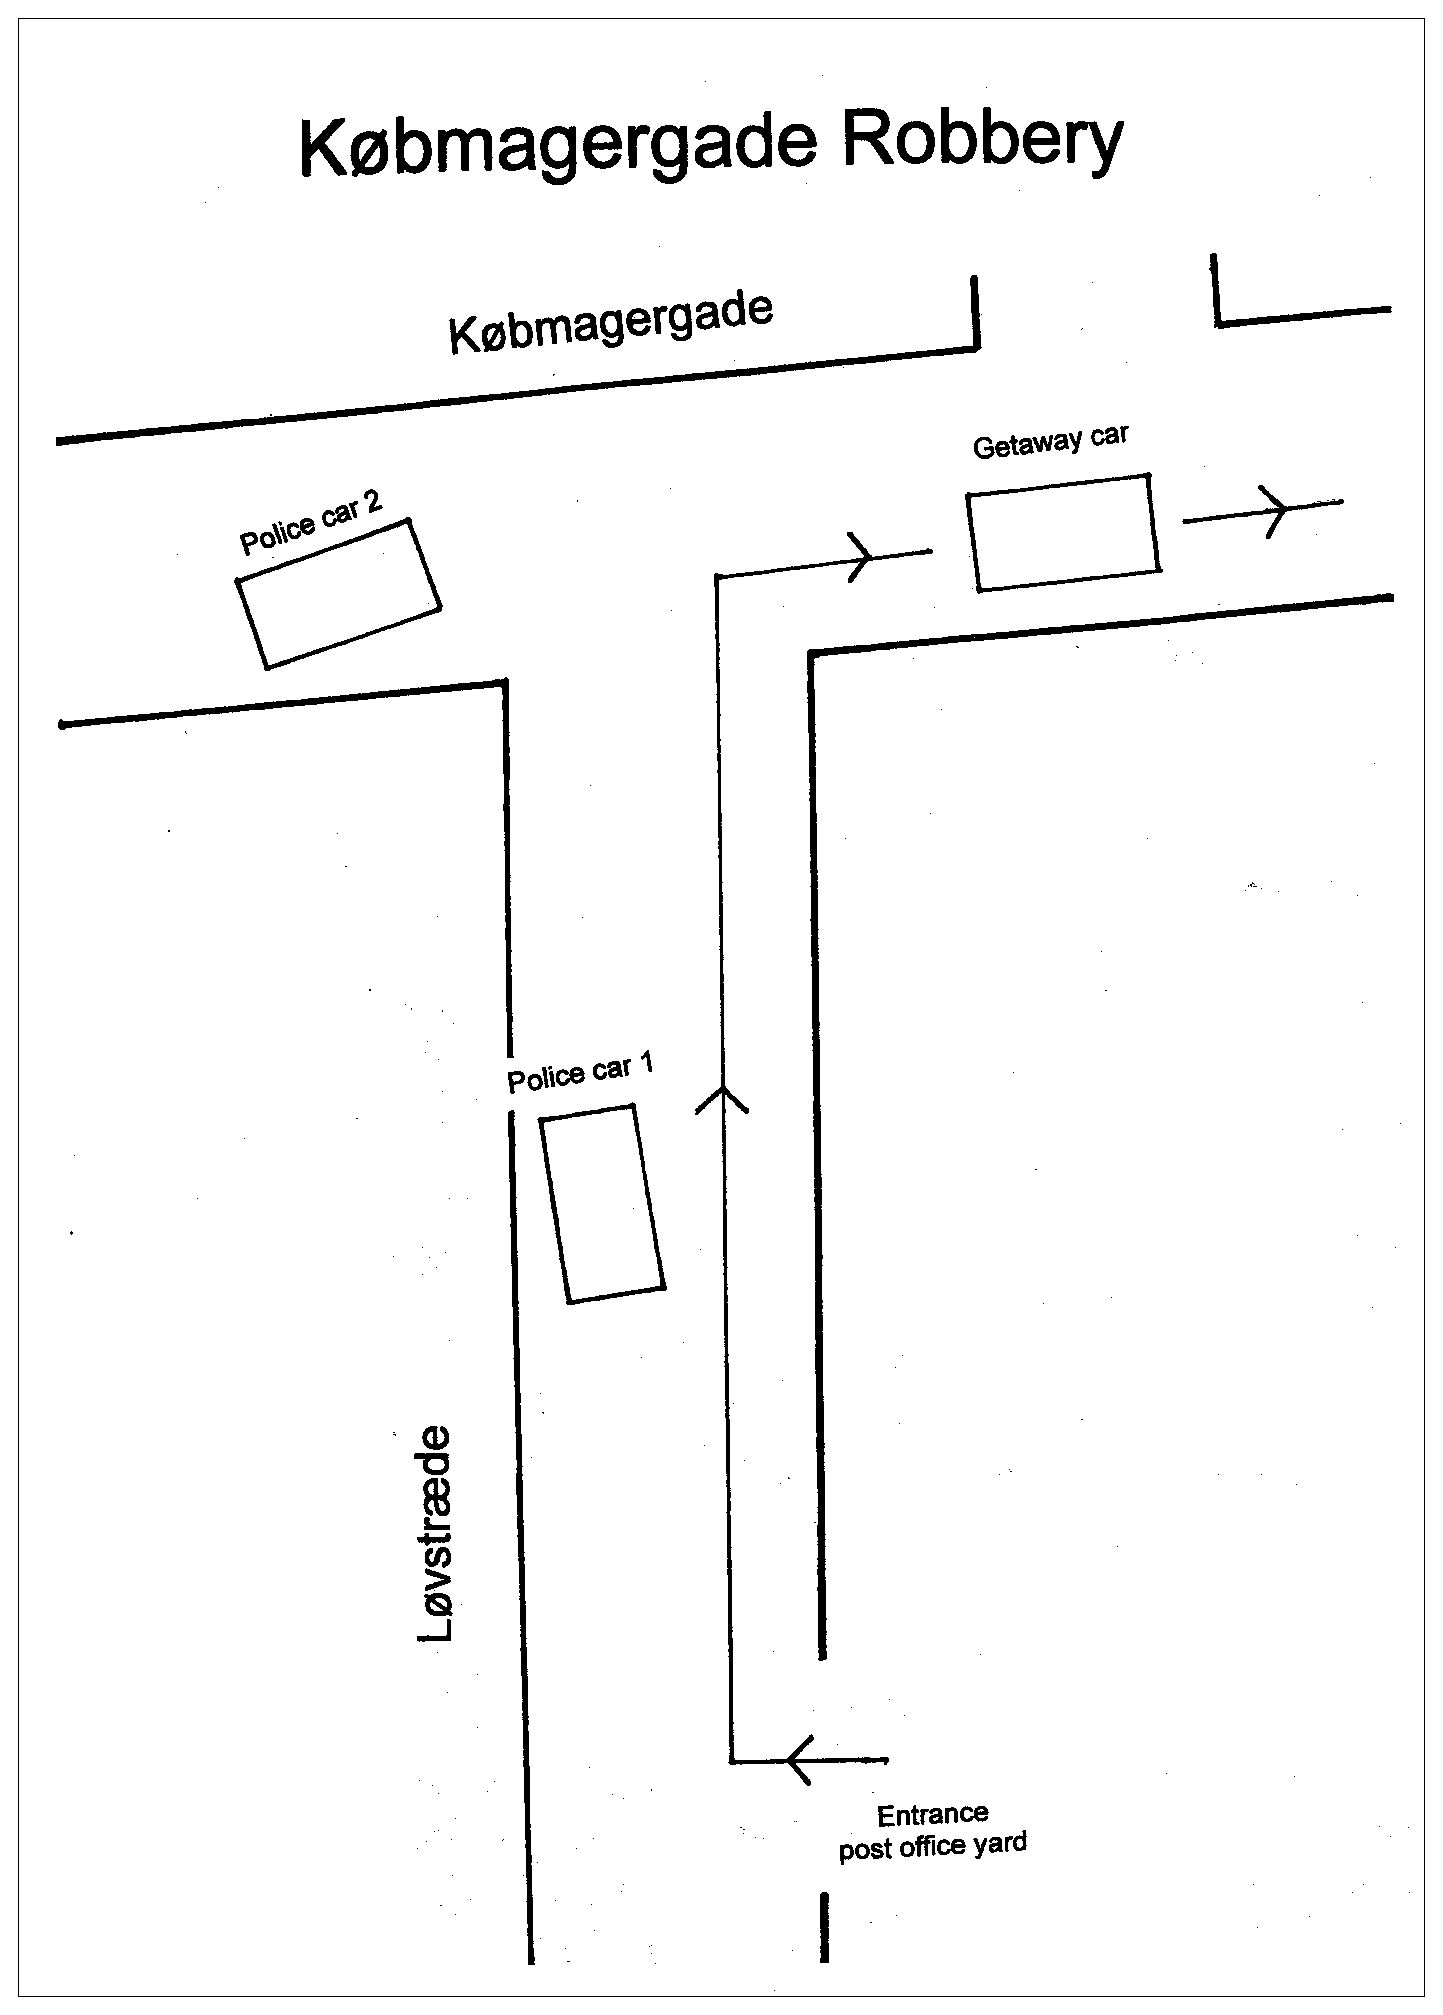 Rough sketch of the escape route after the Købmagergade Robbery in 1988: The shot the direction of police car 2 was fired when the getaway car briefly stopped at the indicated spot.